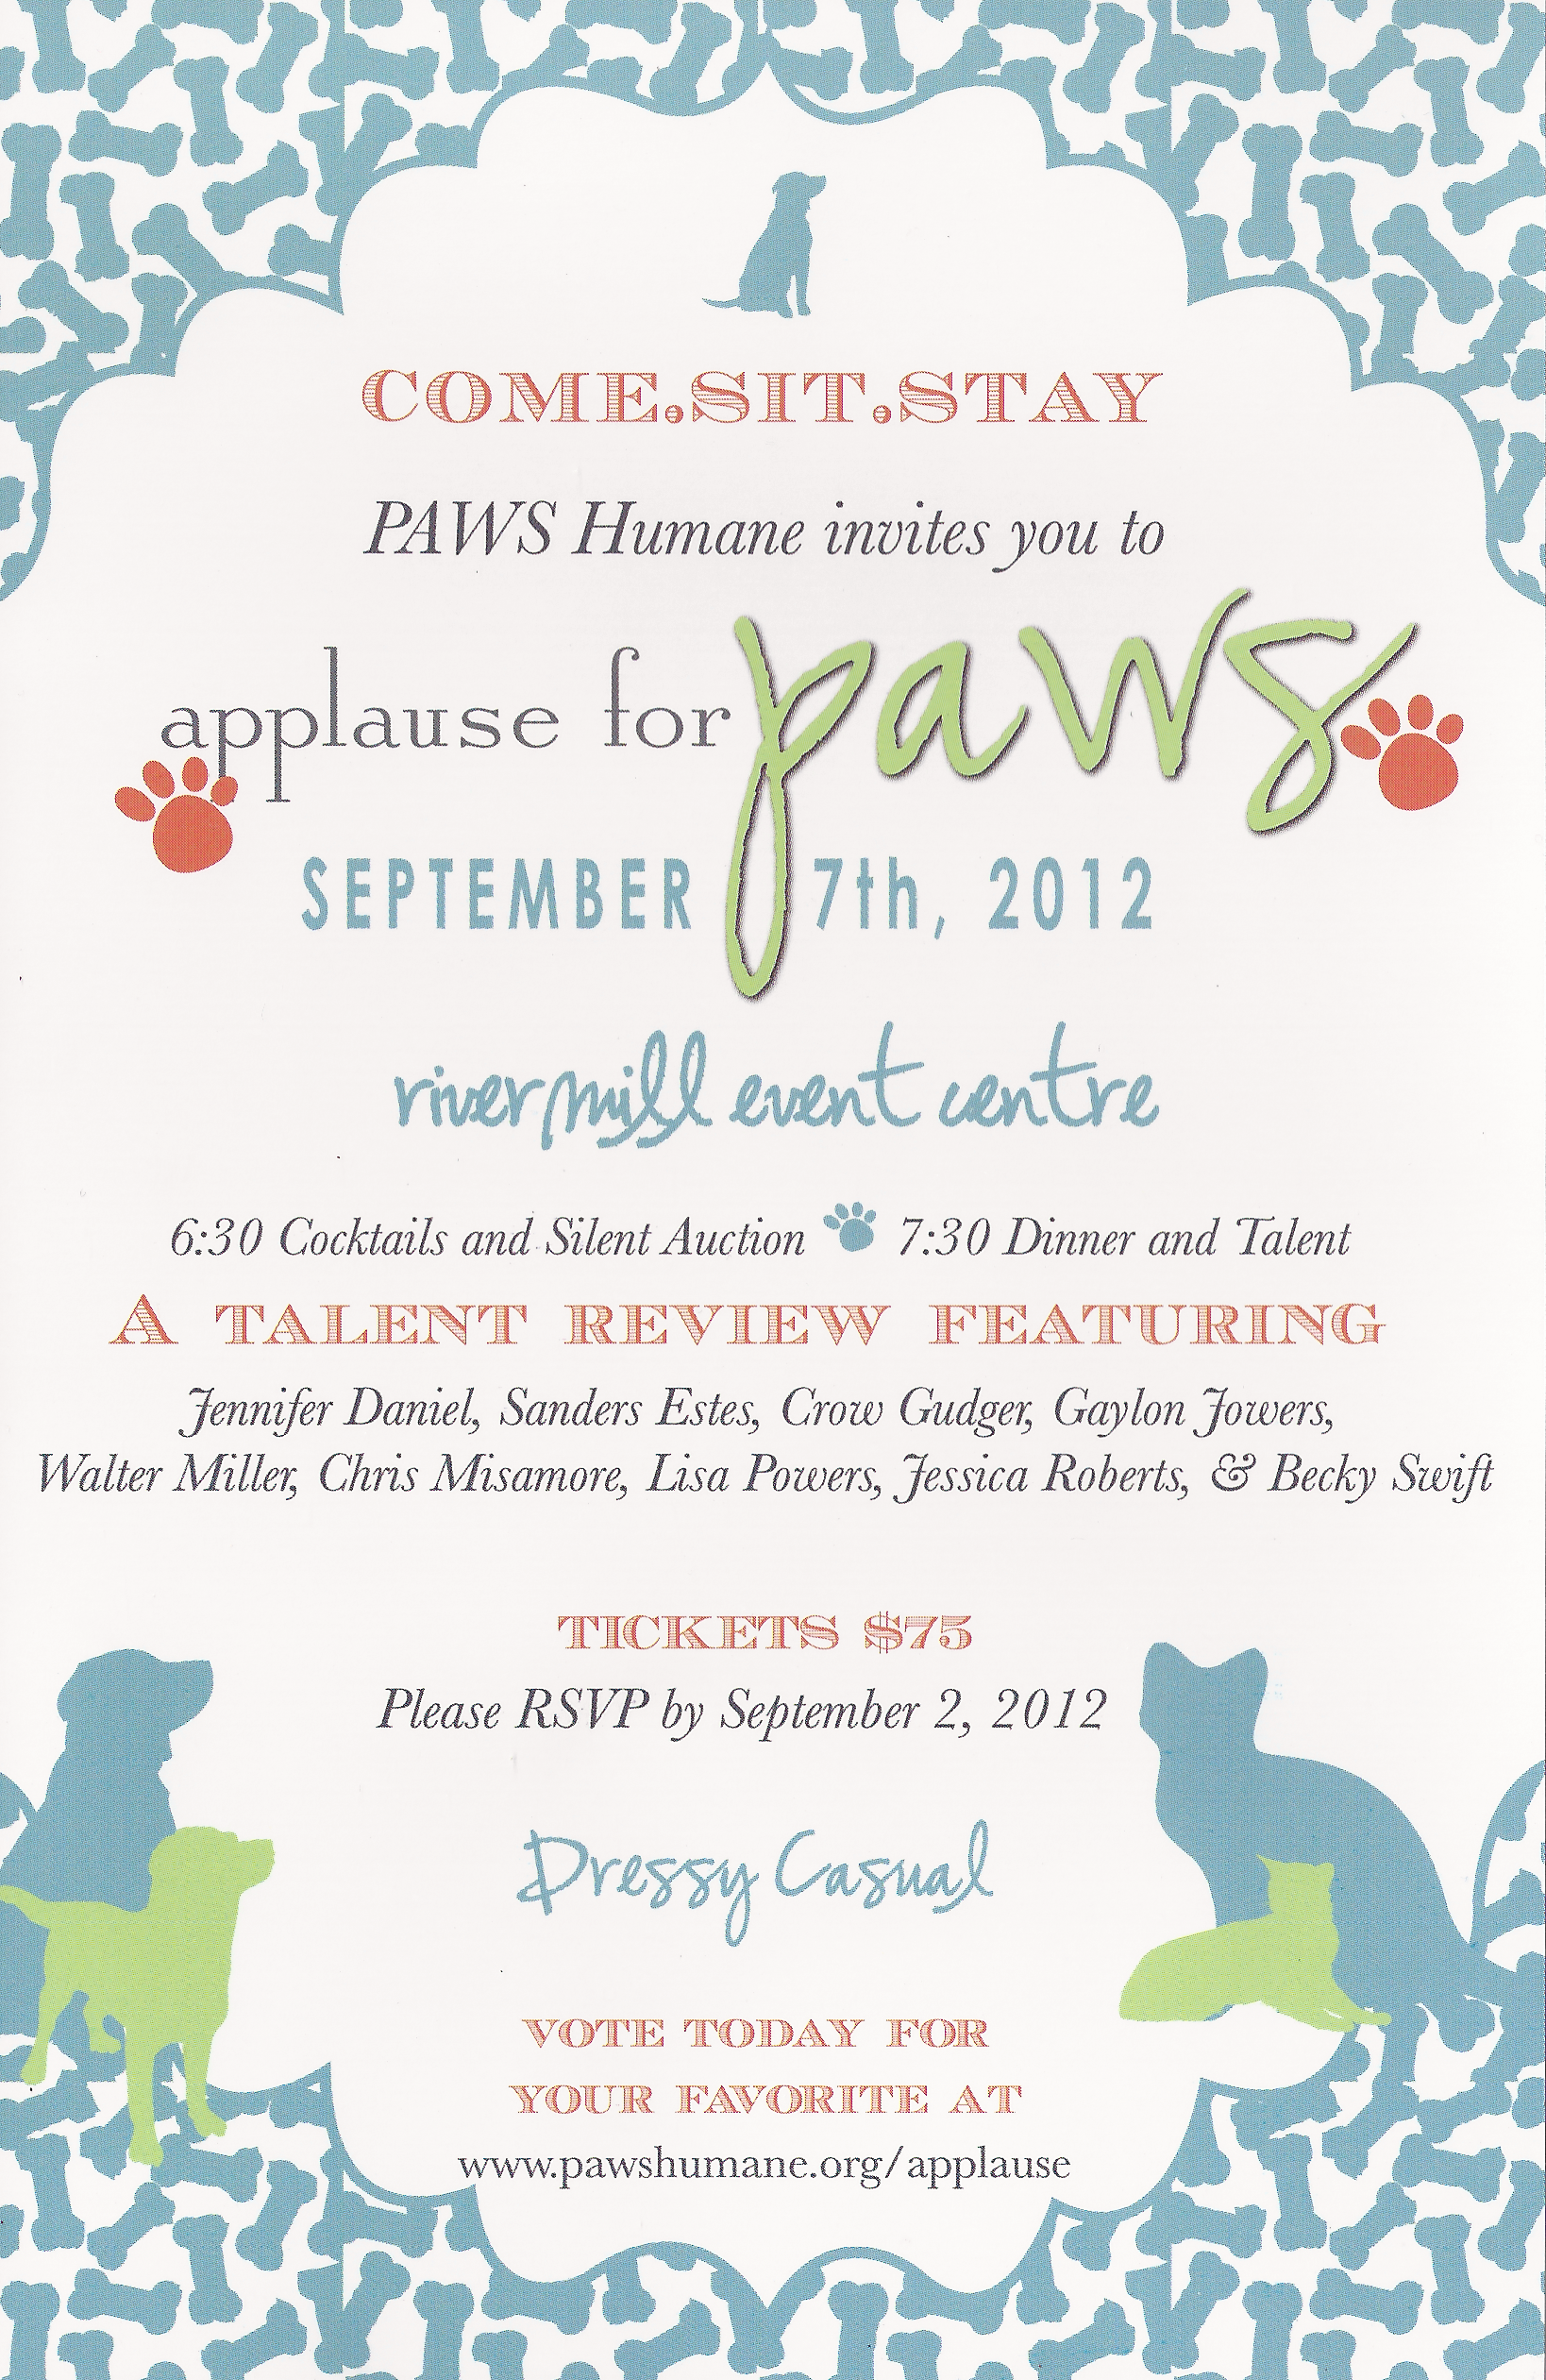 Applause for PAWS Dinner, Talent, and Silent Auction Fundraiser